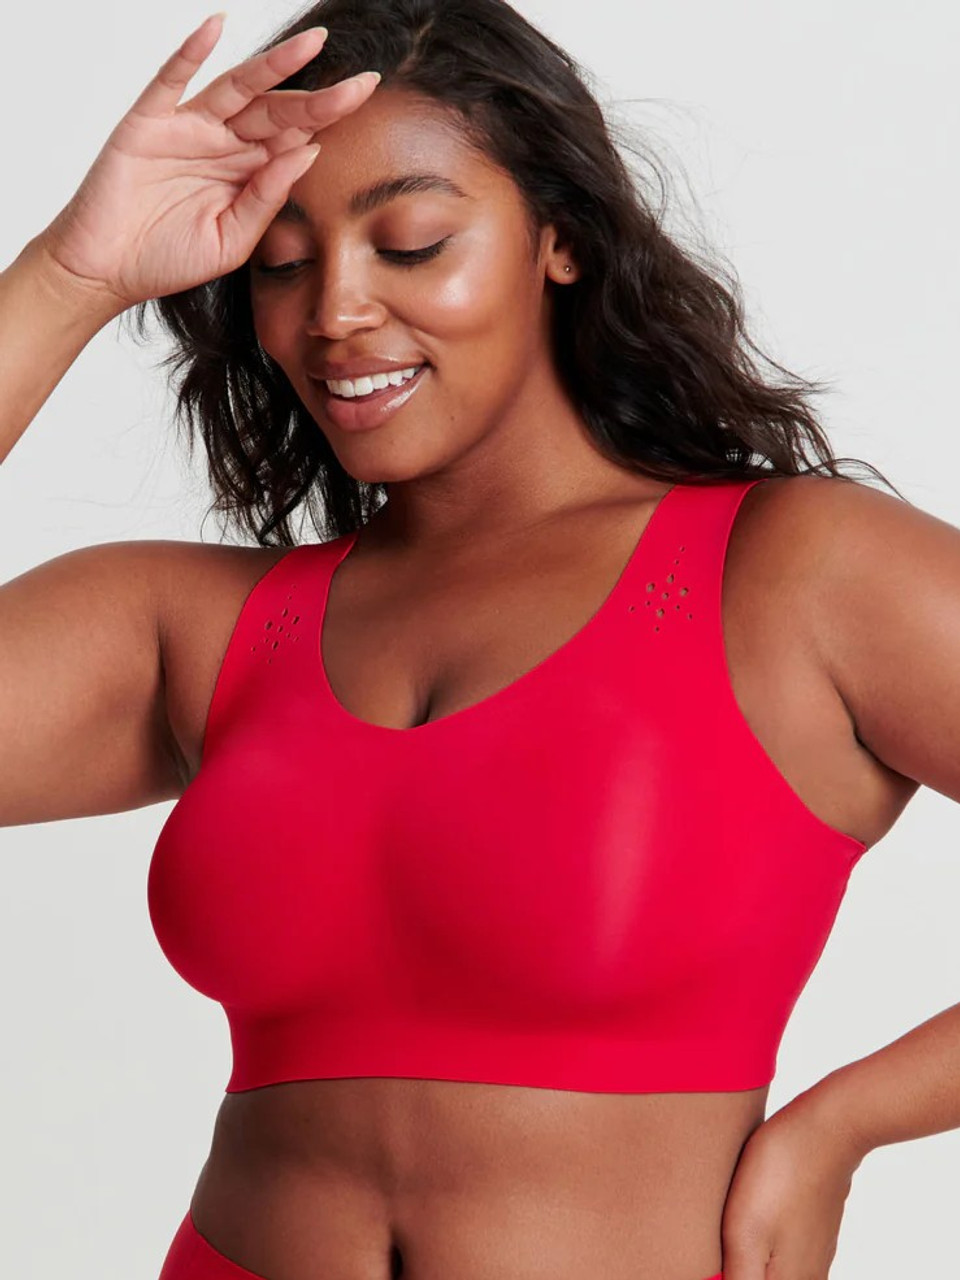 Evelyn & Bobbie Defy Bra Tank-- Everyday Wireless Comfort BUY 2 OR MORE  AND SAVE!